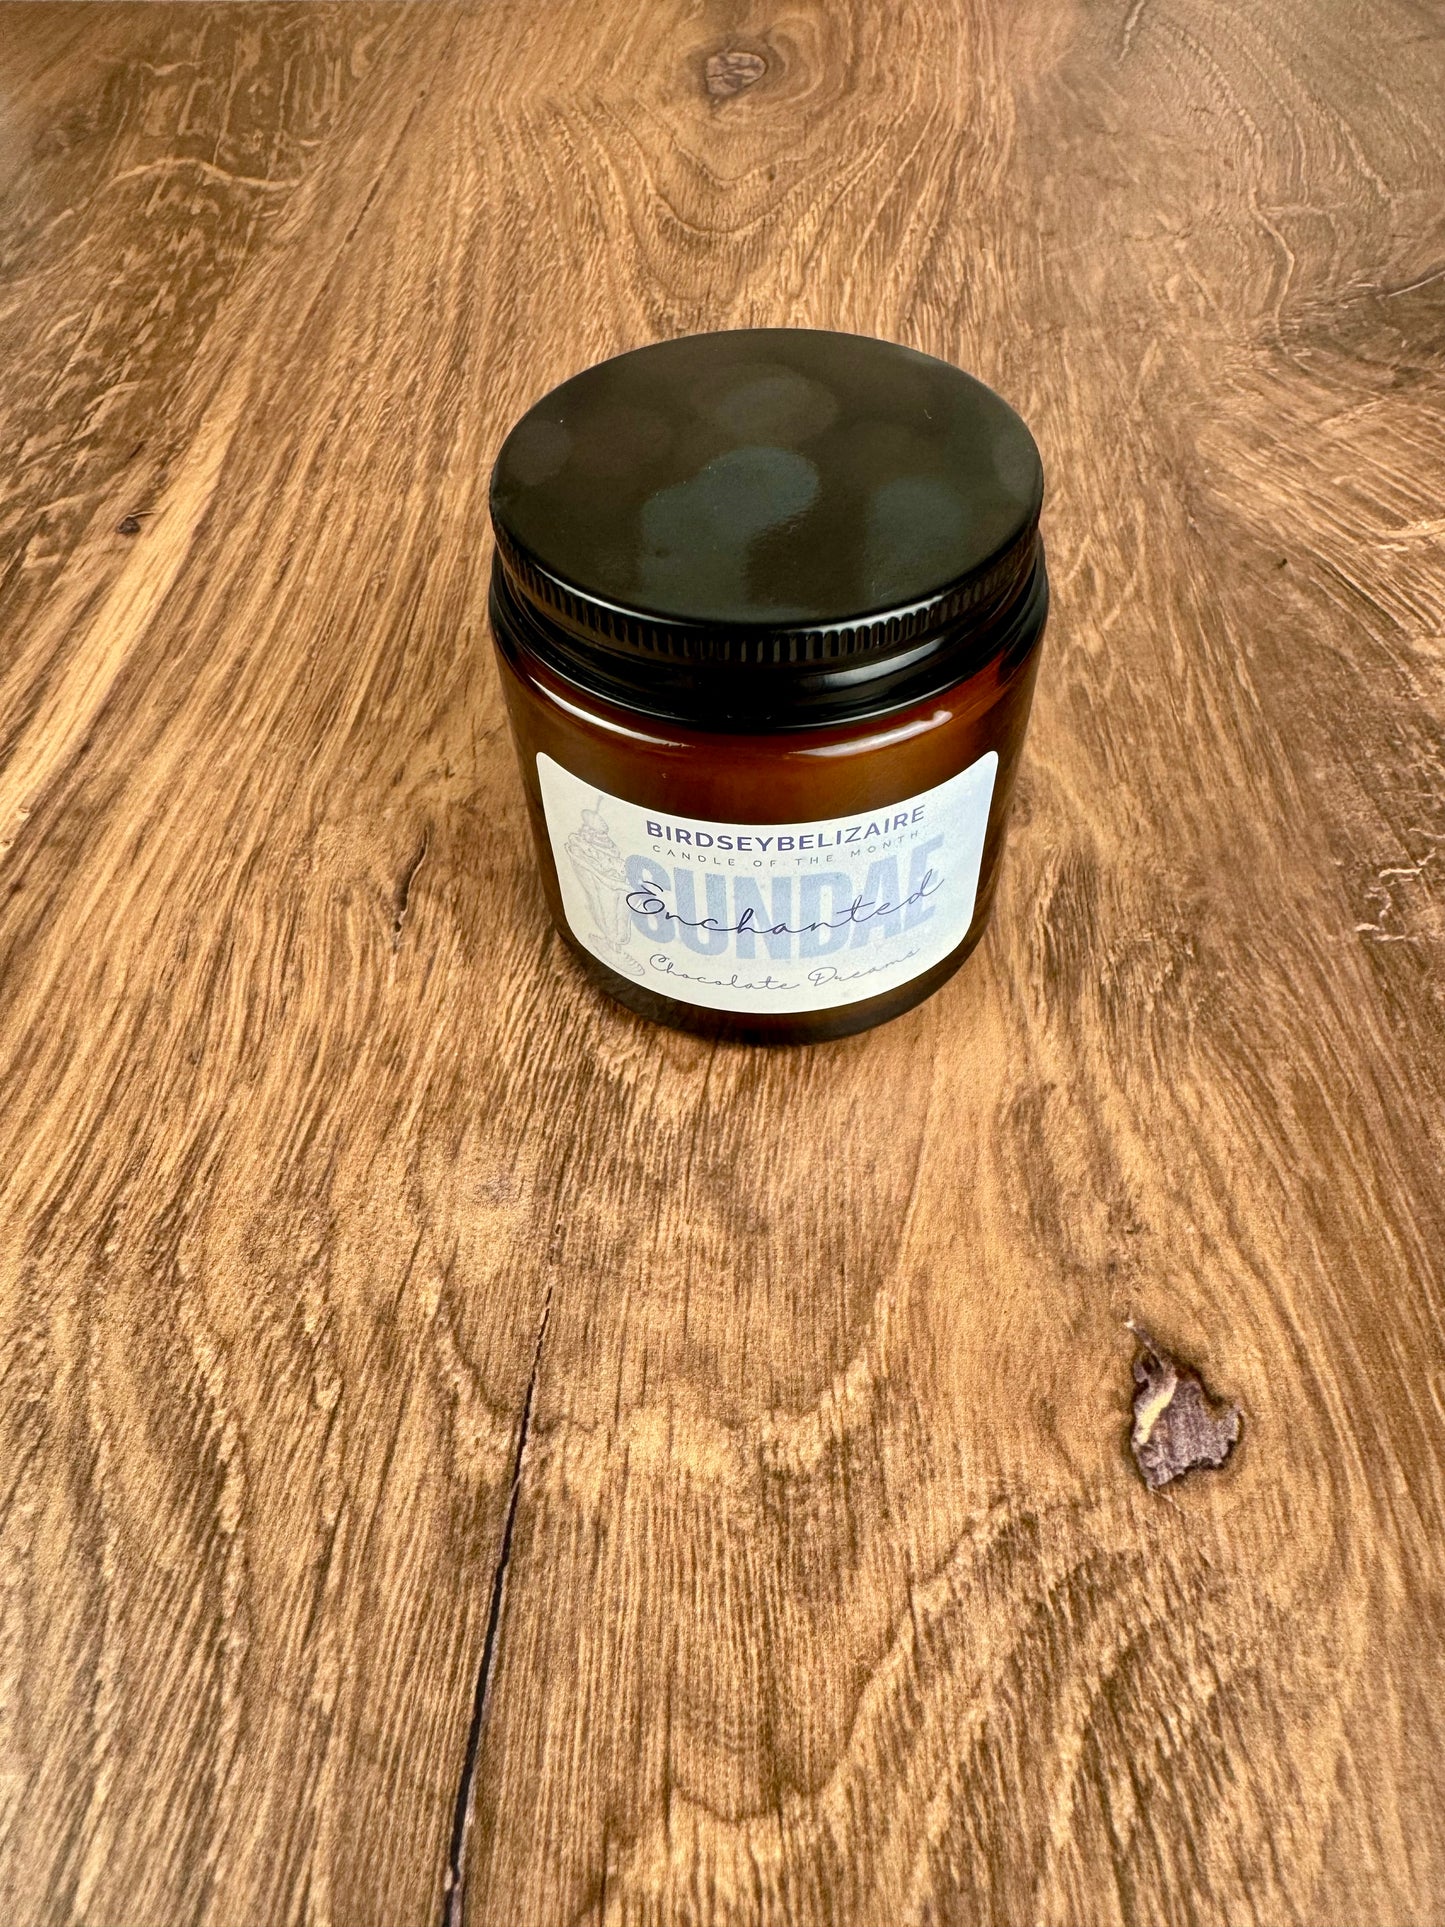 Limited Edition - Candle of the Month Subscription